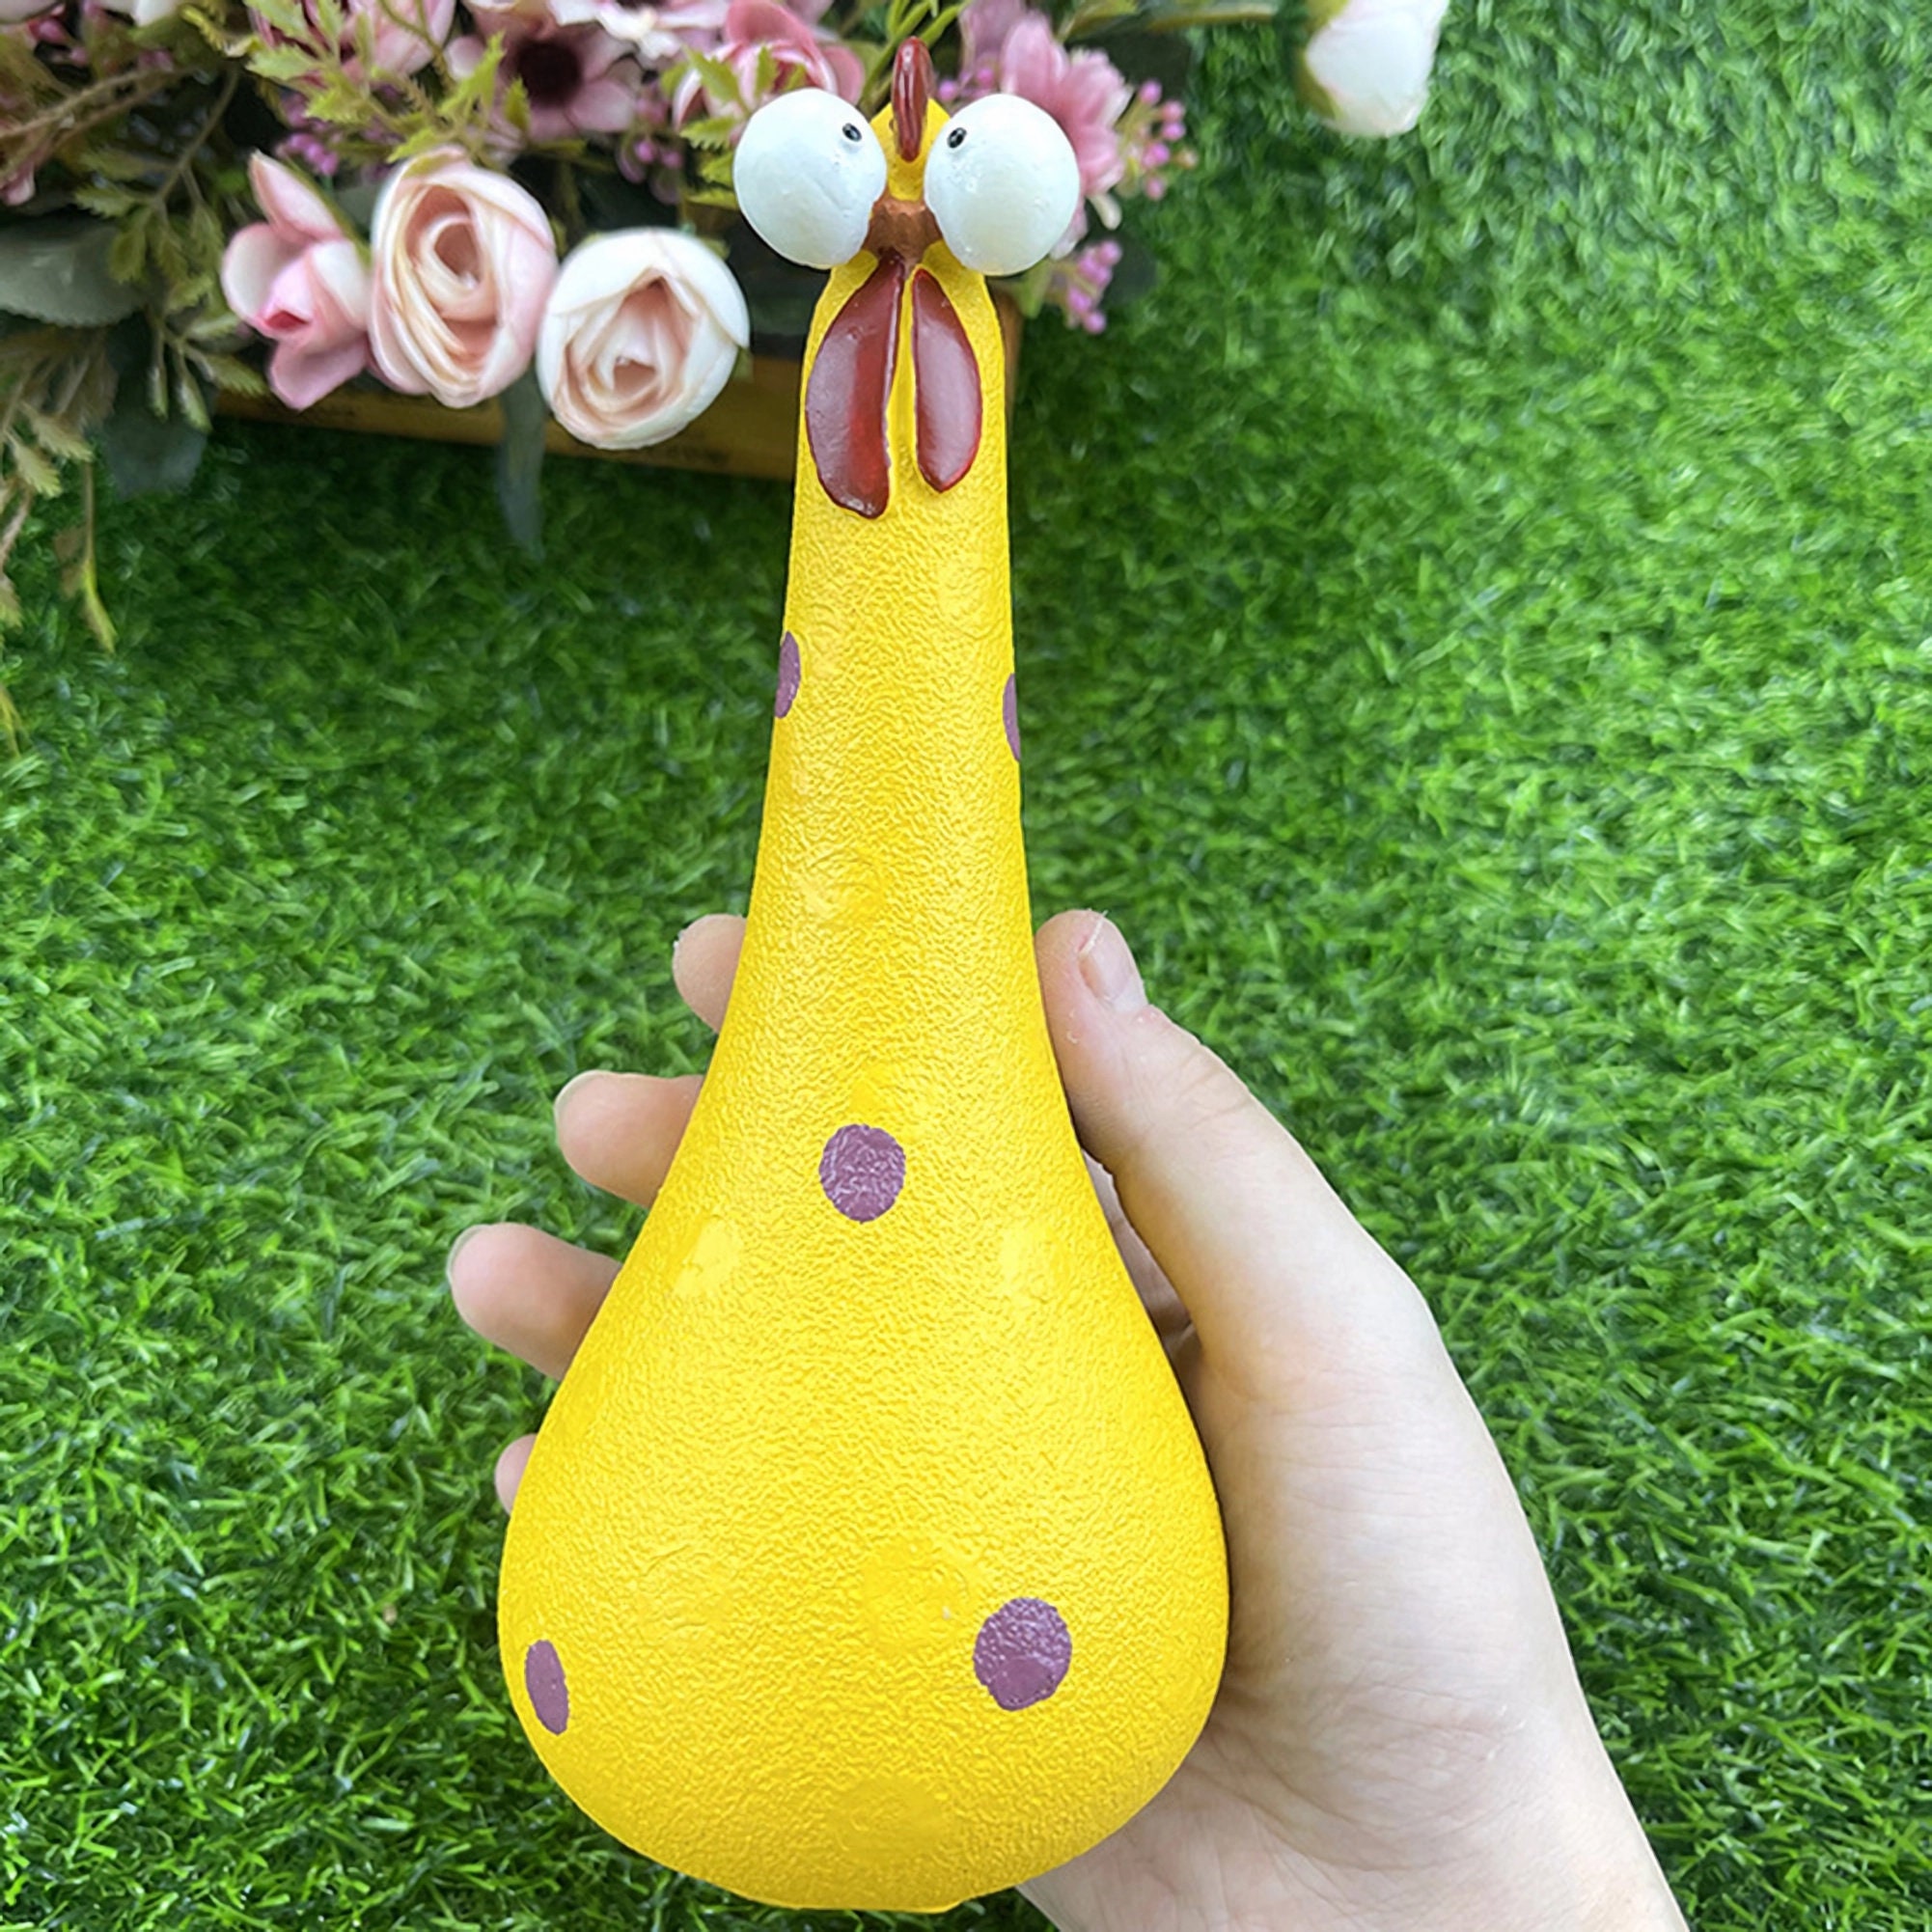 50% OFF SELLING - 🐔Silly Chicken Decor